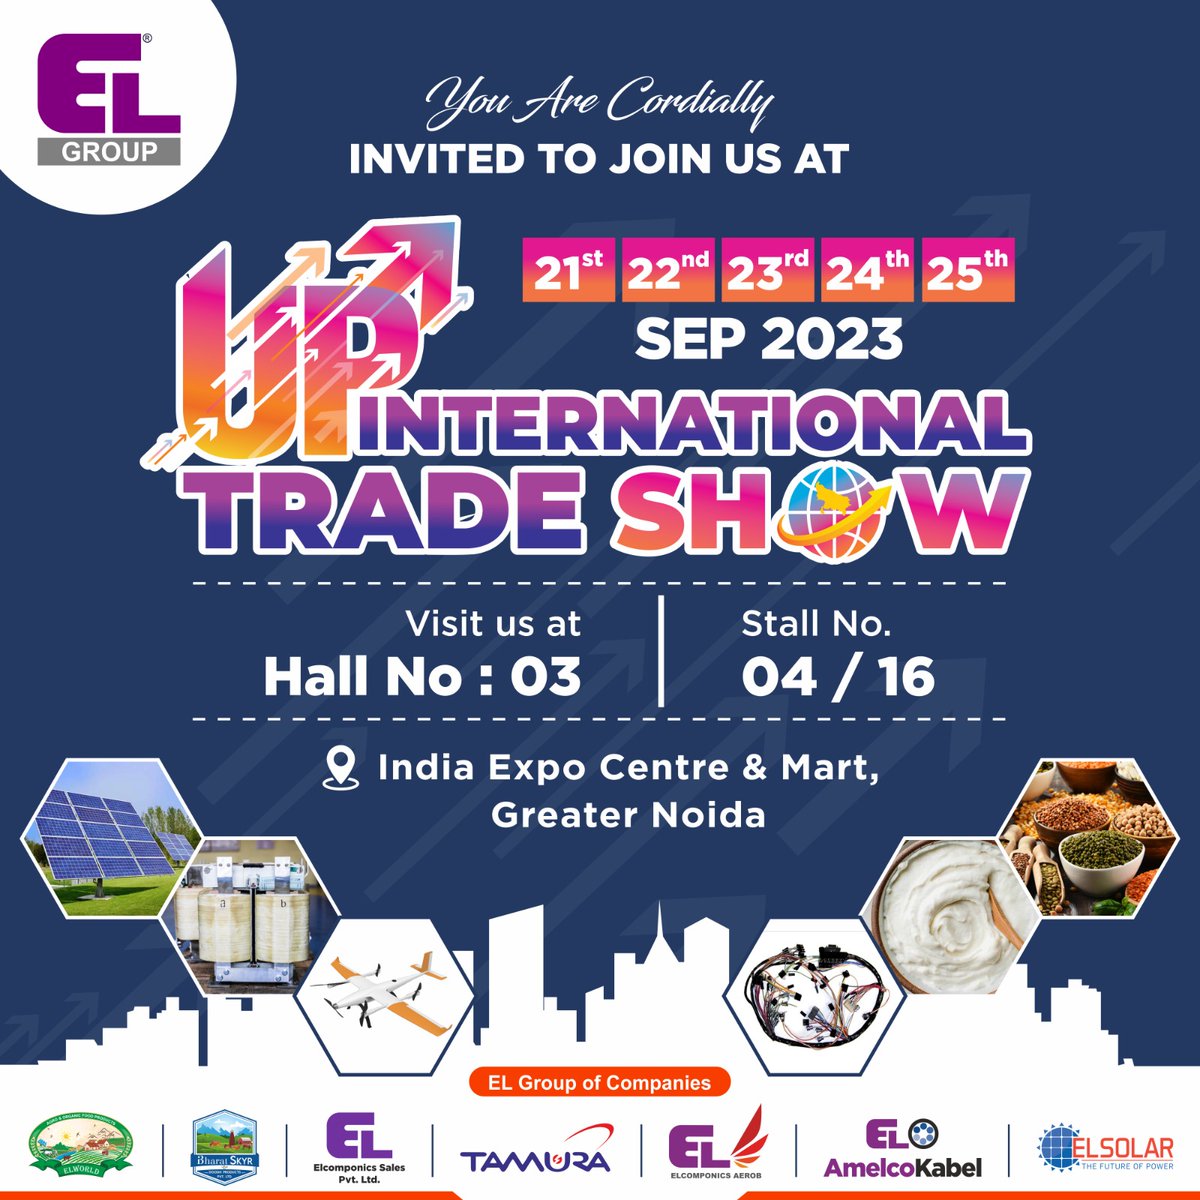 TRADE SHOW ALERT!
Visit our Stall 'UP International Trade Show - 2023' India Expo Center & Mart, Greater Noida Date  21- 25 September, 2023 !
elworldorganic.com
#UttarPradesh #upinternationaltradeshow #elgroup #ELWorldOrganic #GlobalTradeShow #InnovationUnleashed